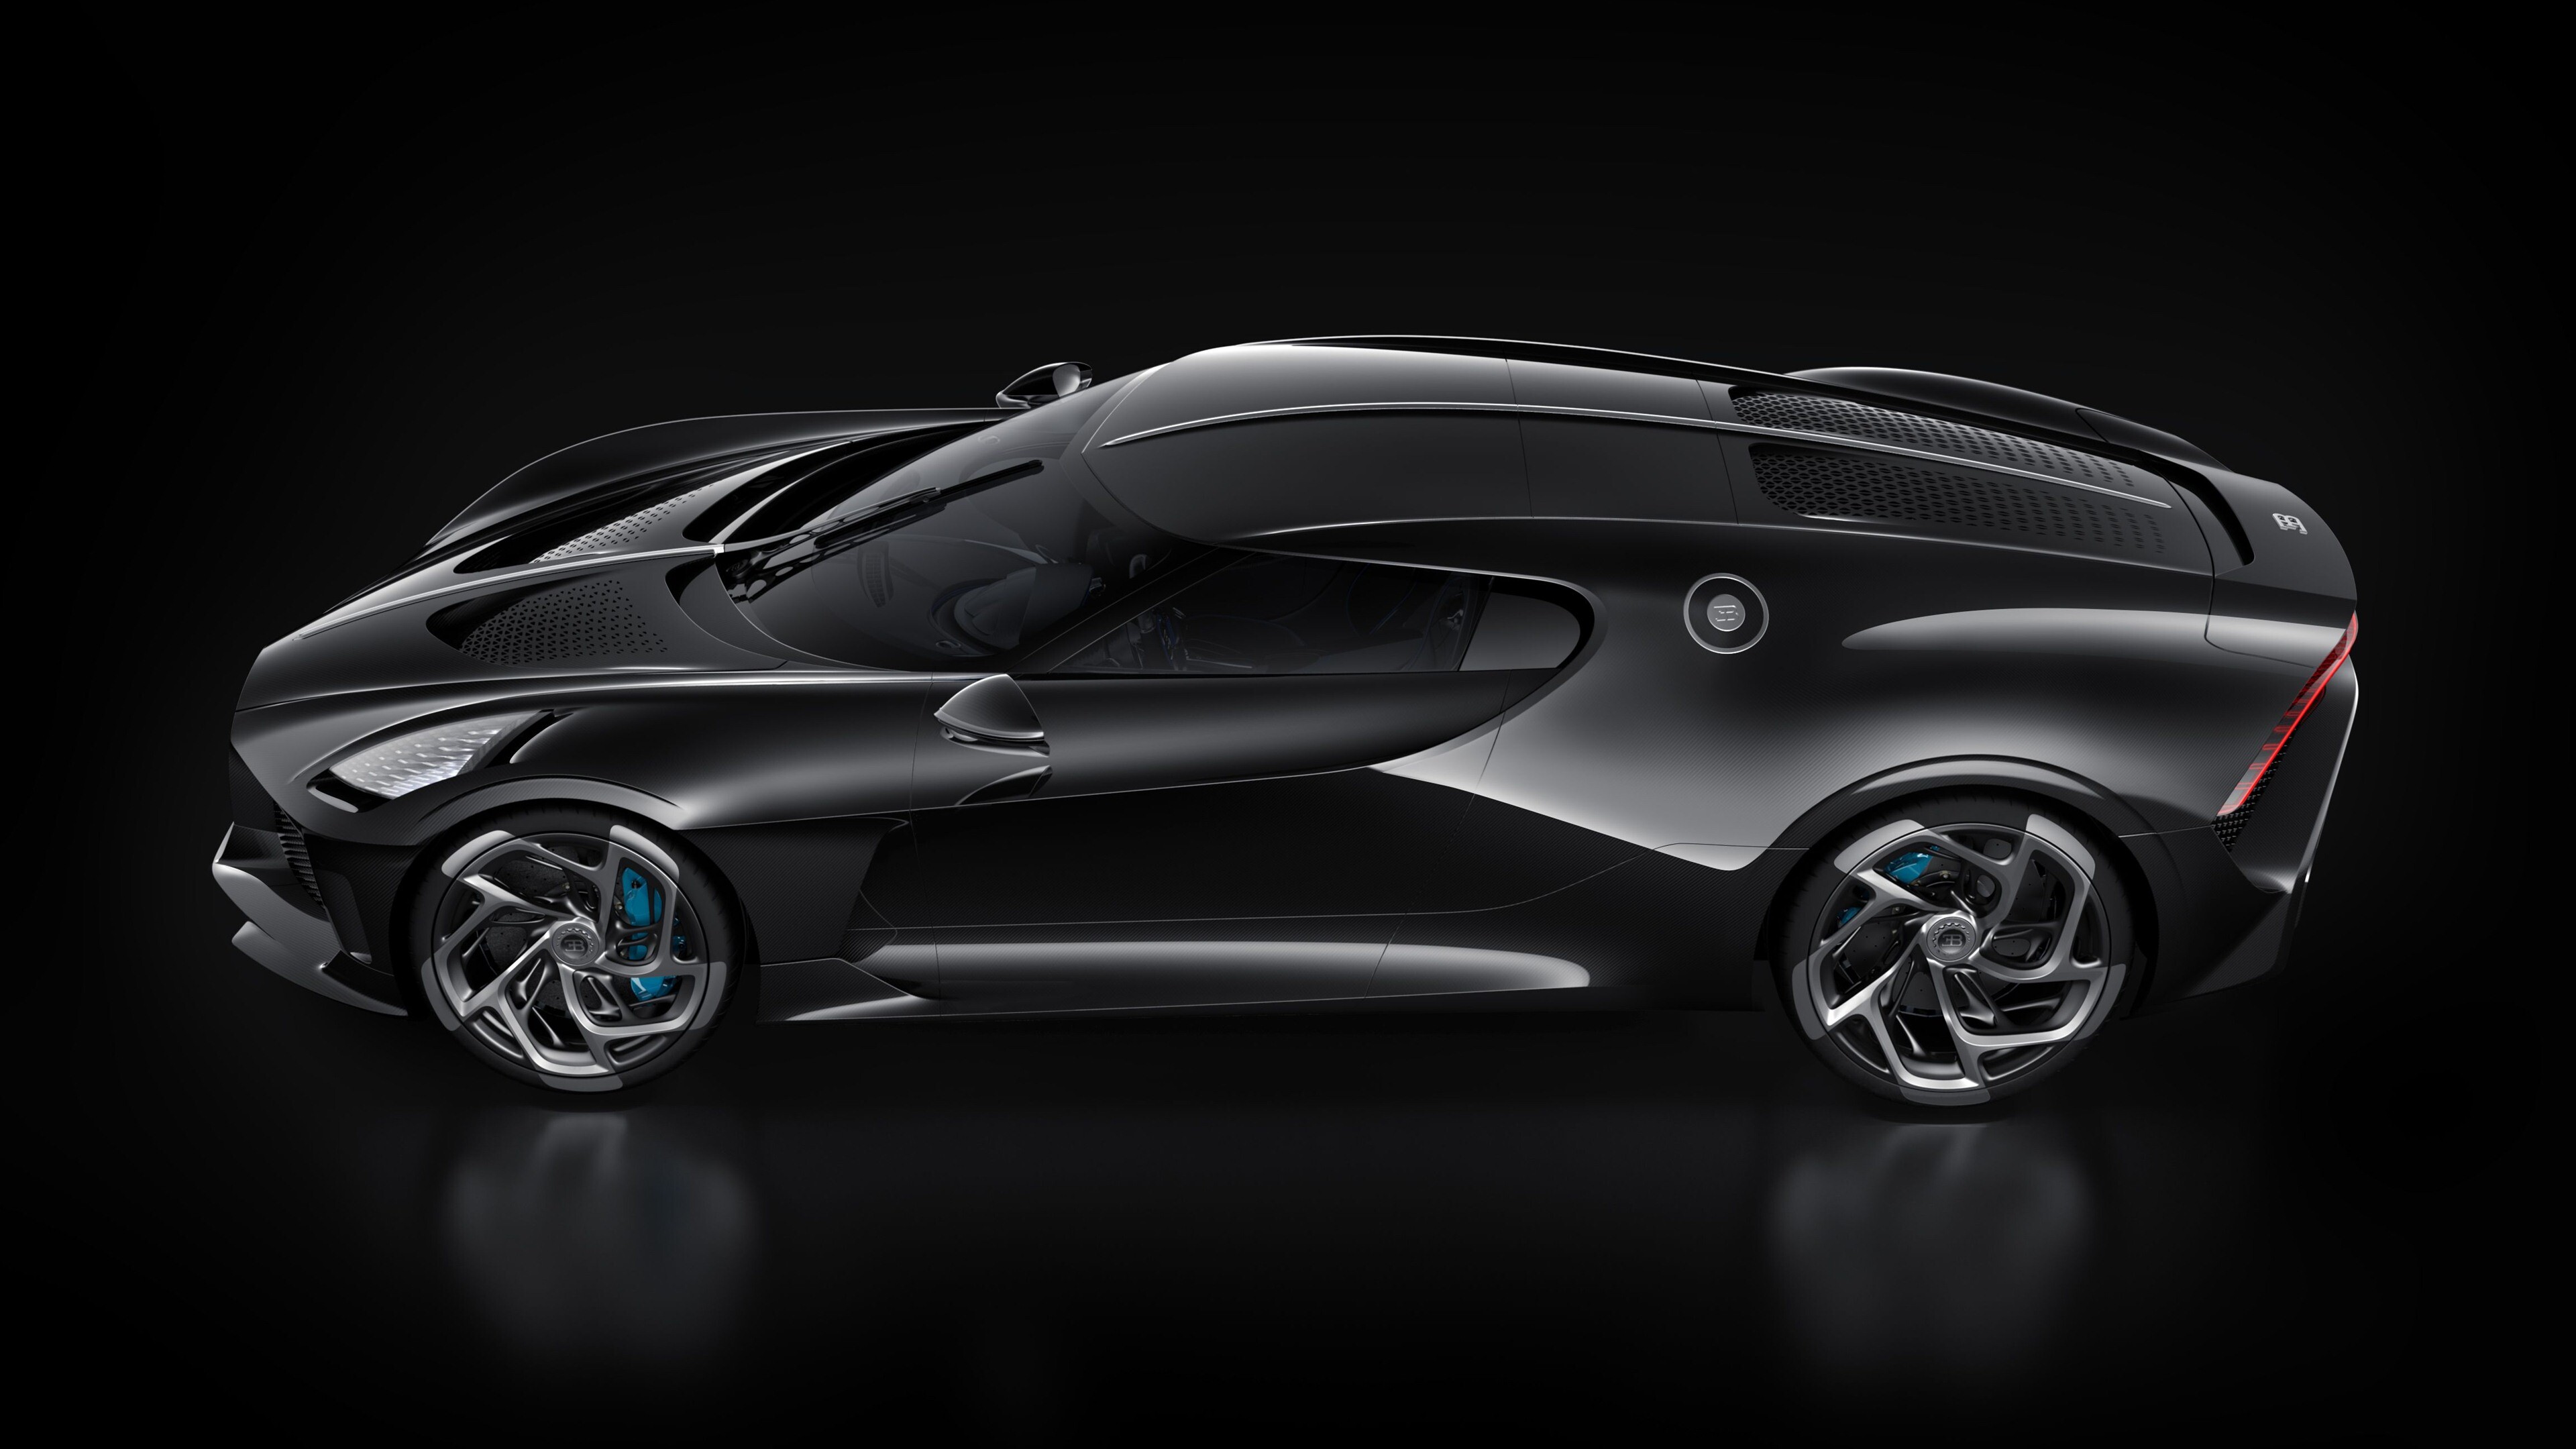 Bugatti La Voiture Noire: Hypercar, based on the Chiron, Supercars, A French luxury automobile. 3840x2160 4K Background.